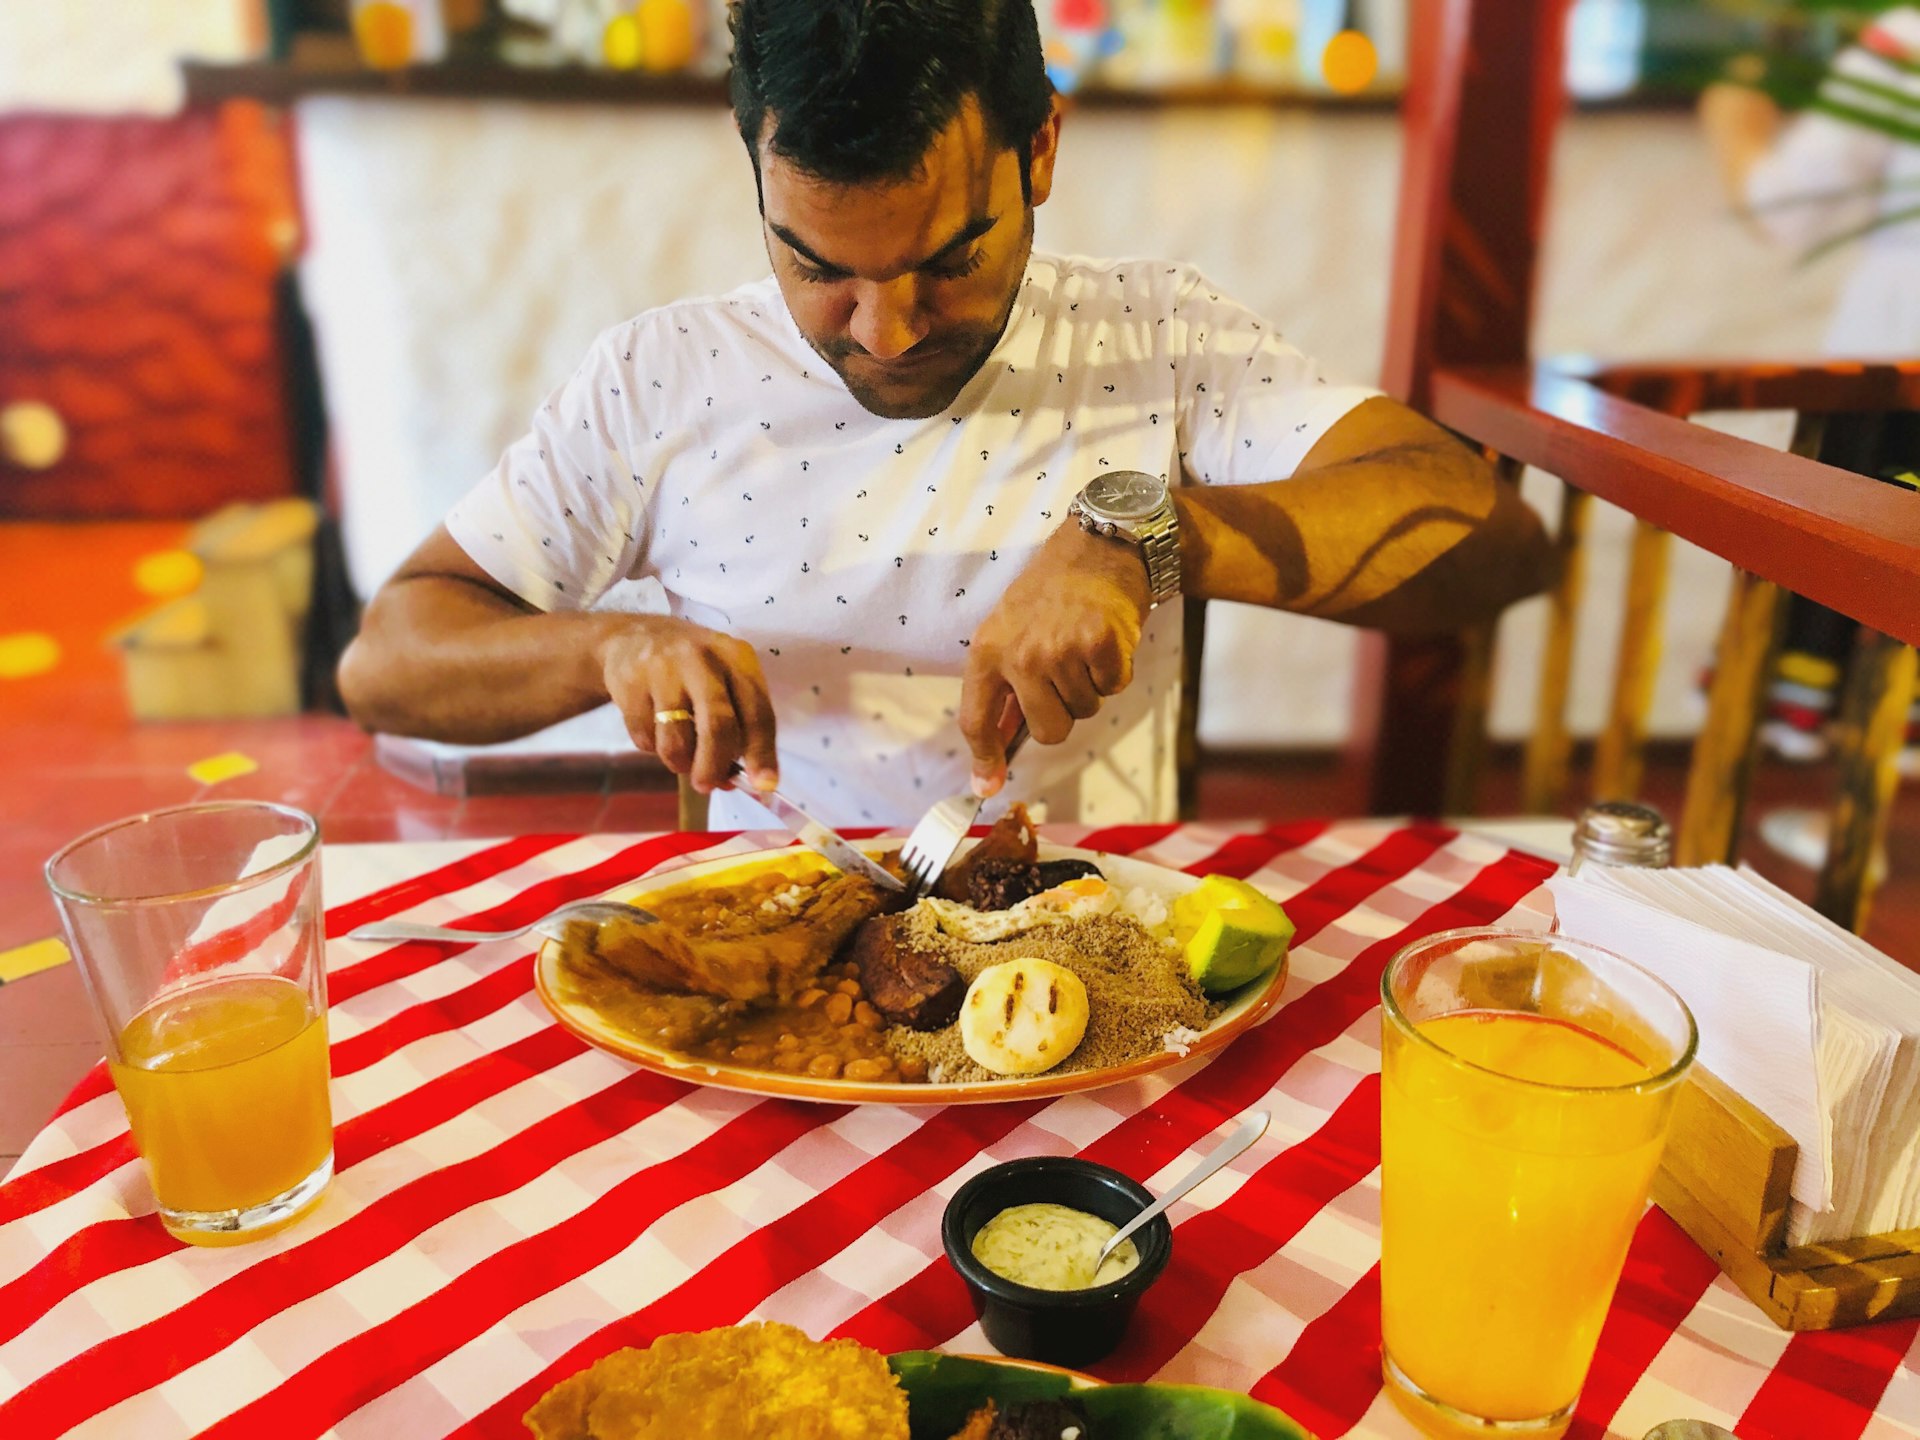 A man tucks into a large plate of food including rice, beans, pork rinds, ground beef, sausage, egg, black pudding, avocado, grilled plantain and arepa